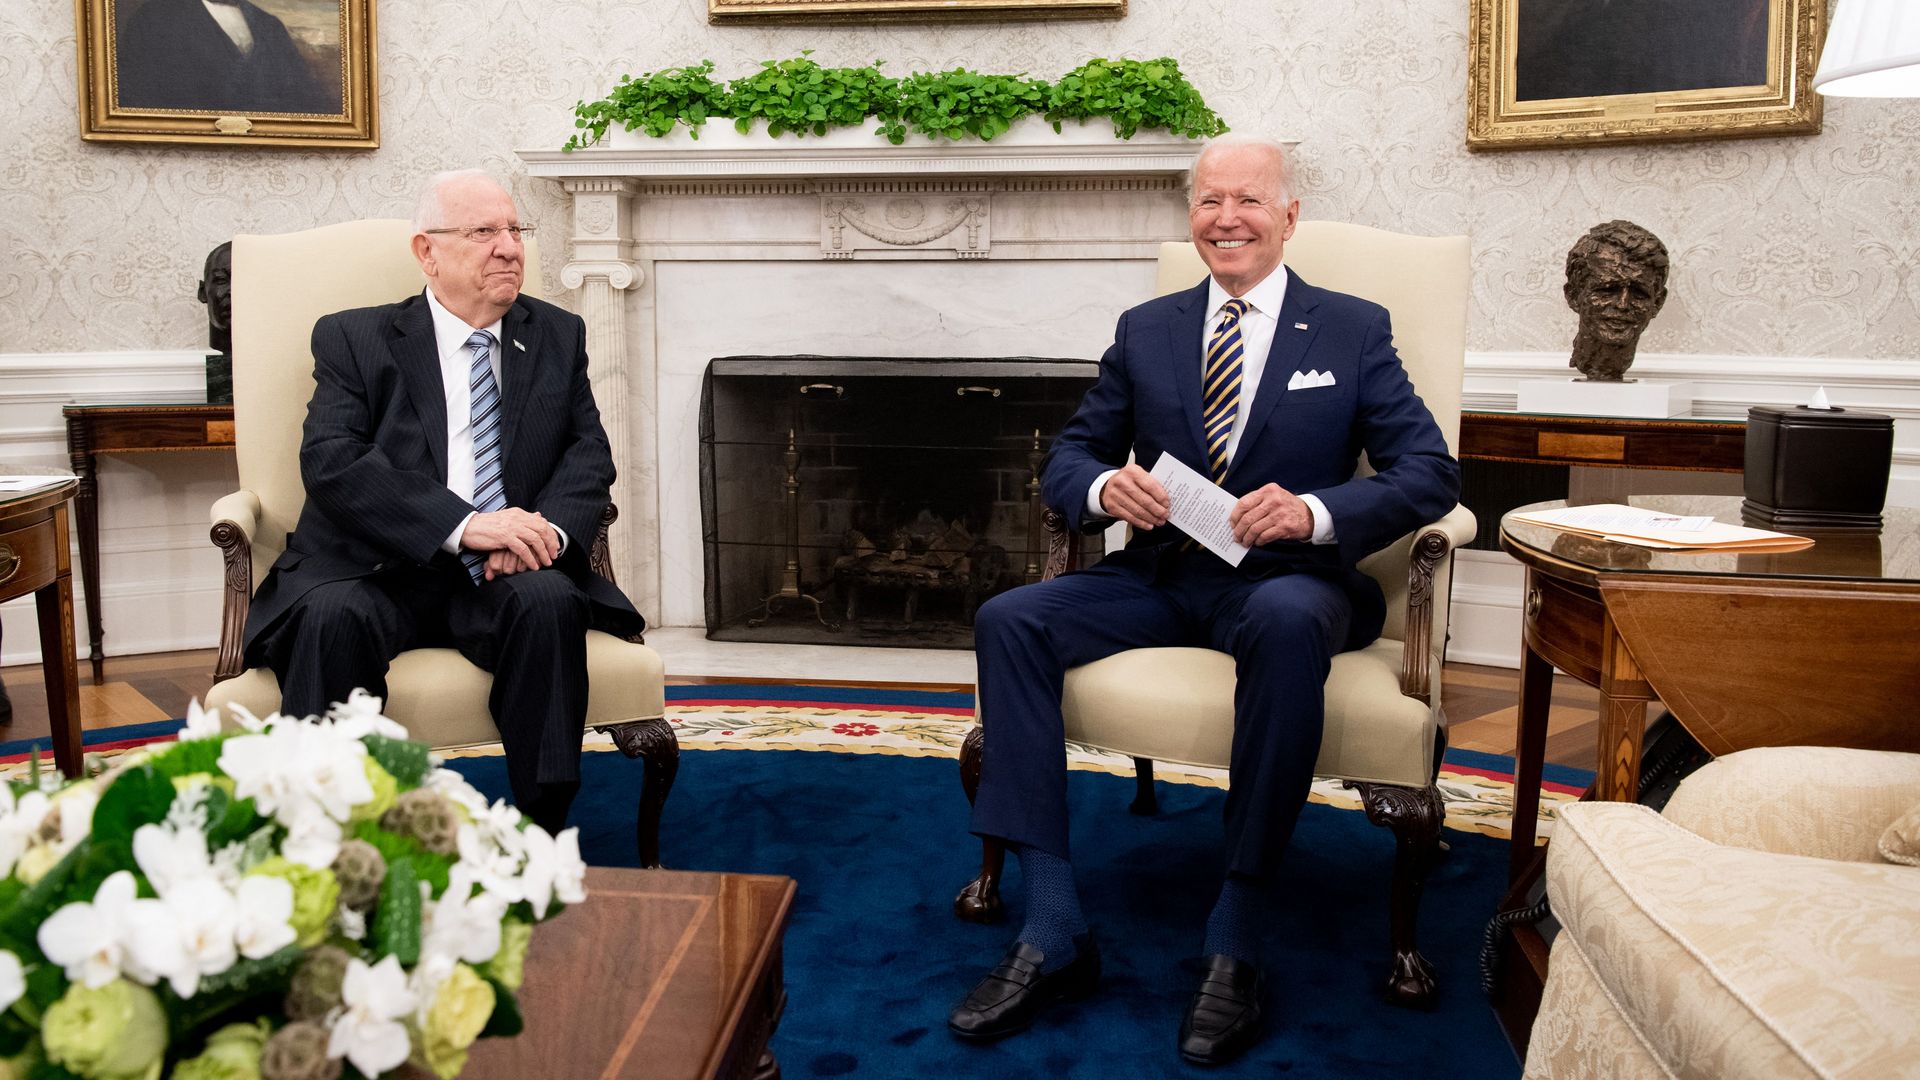 President Biden is seen sitting with Israeli President Reuven Rivlin in the Oval Office.